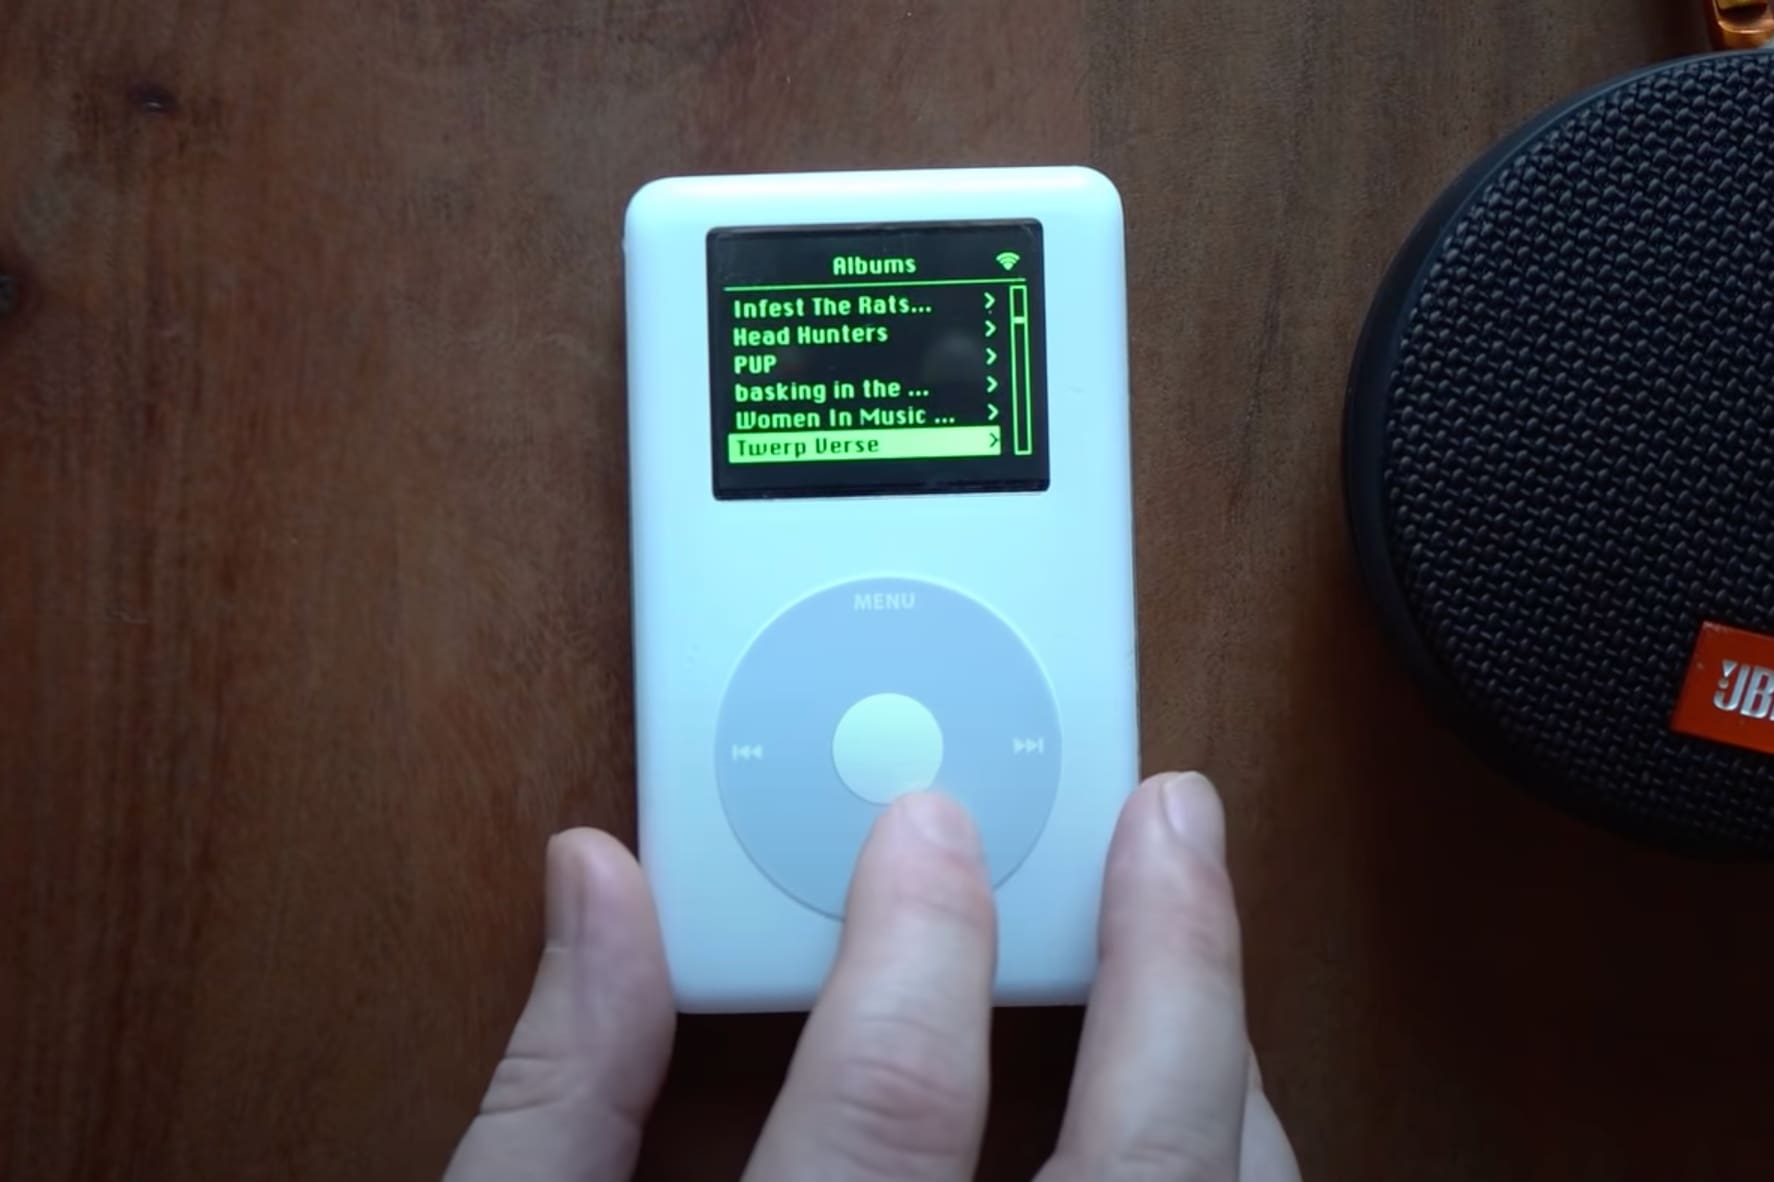 instal the last version for ipod Spotify 1.2.14.1149